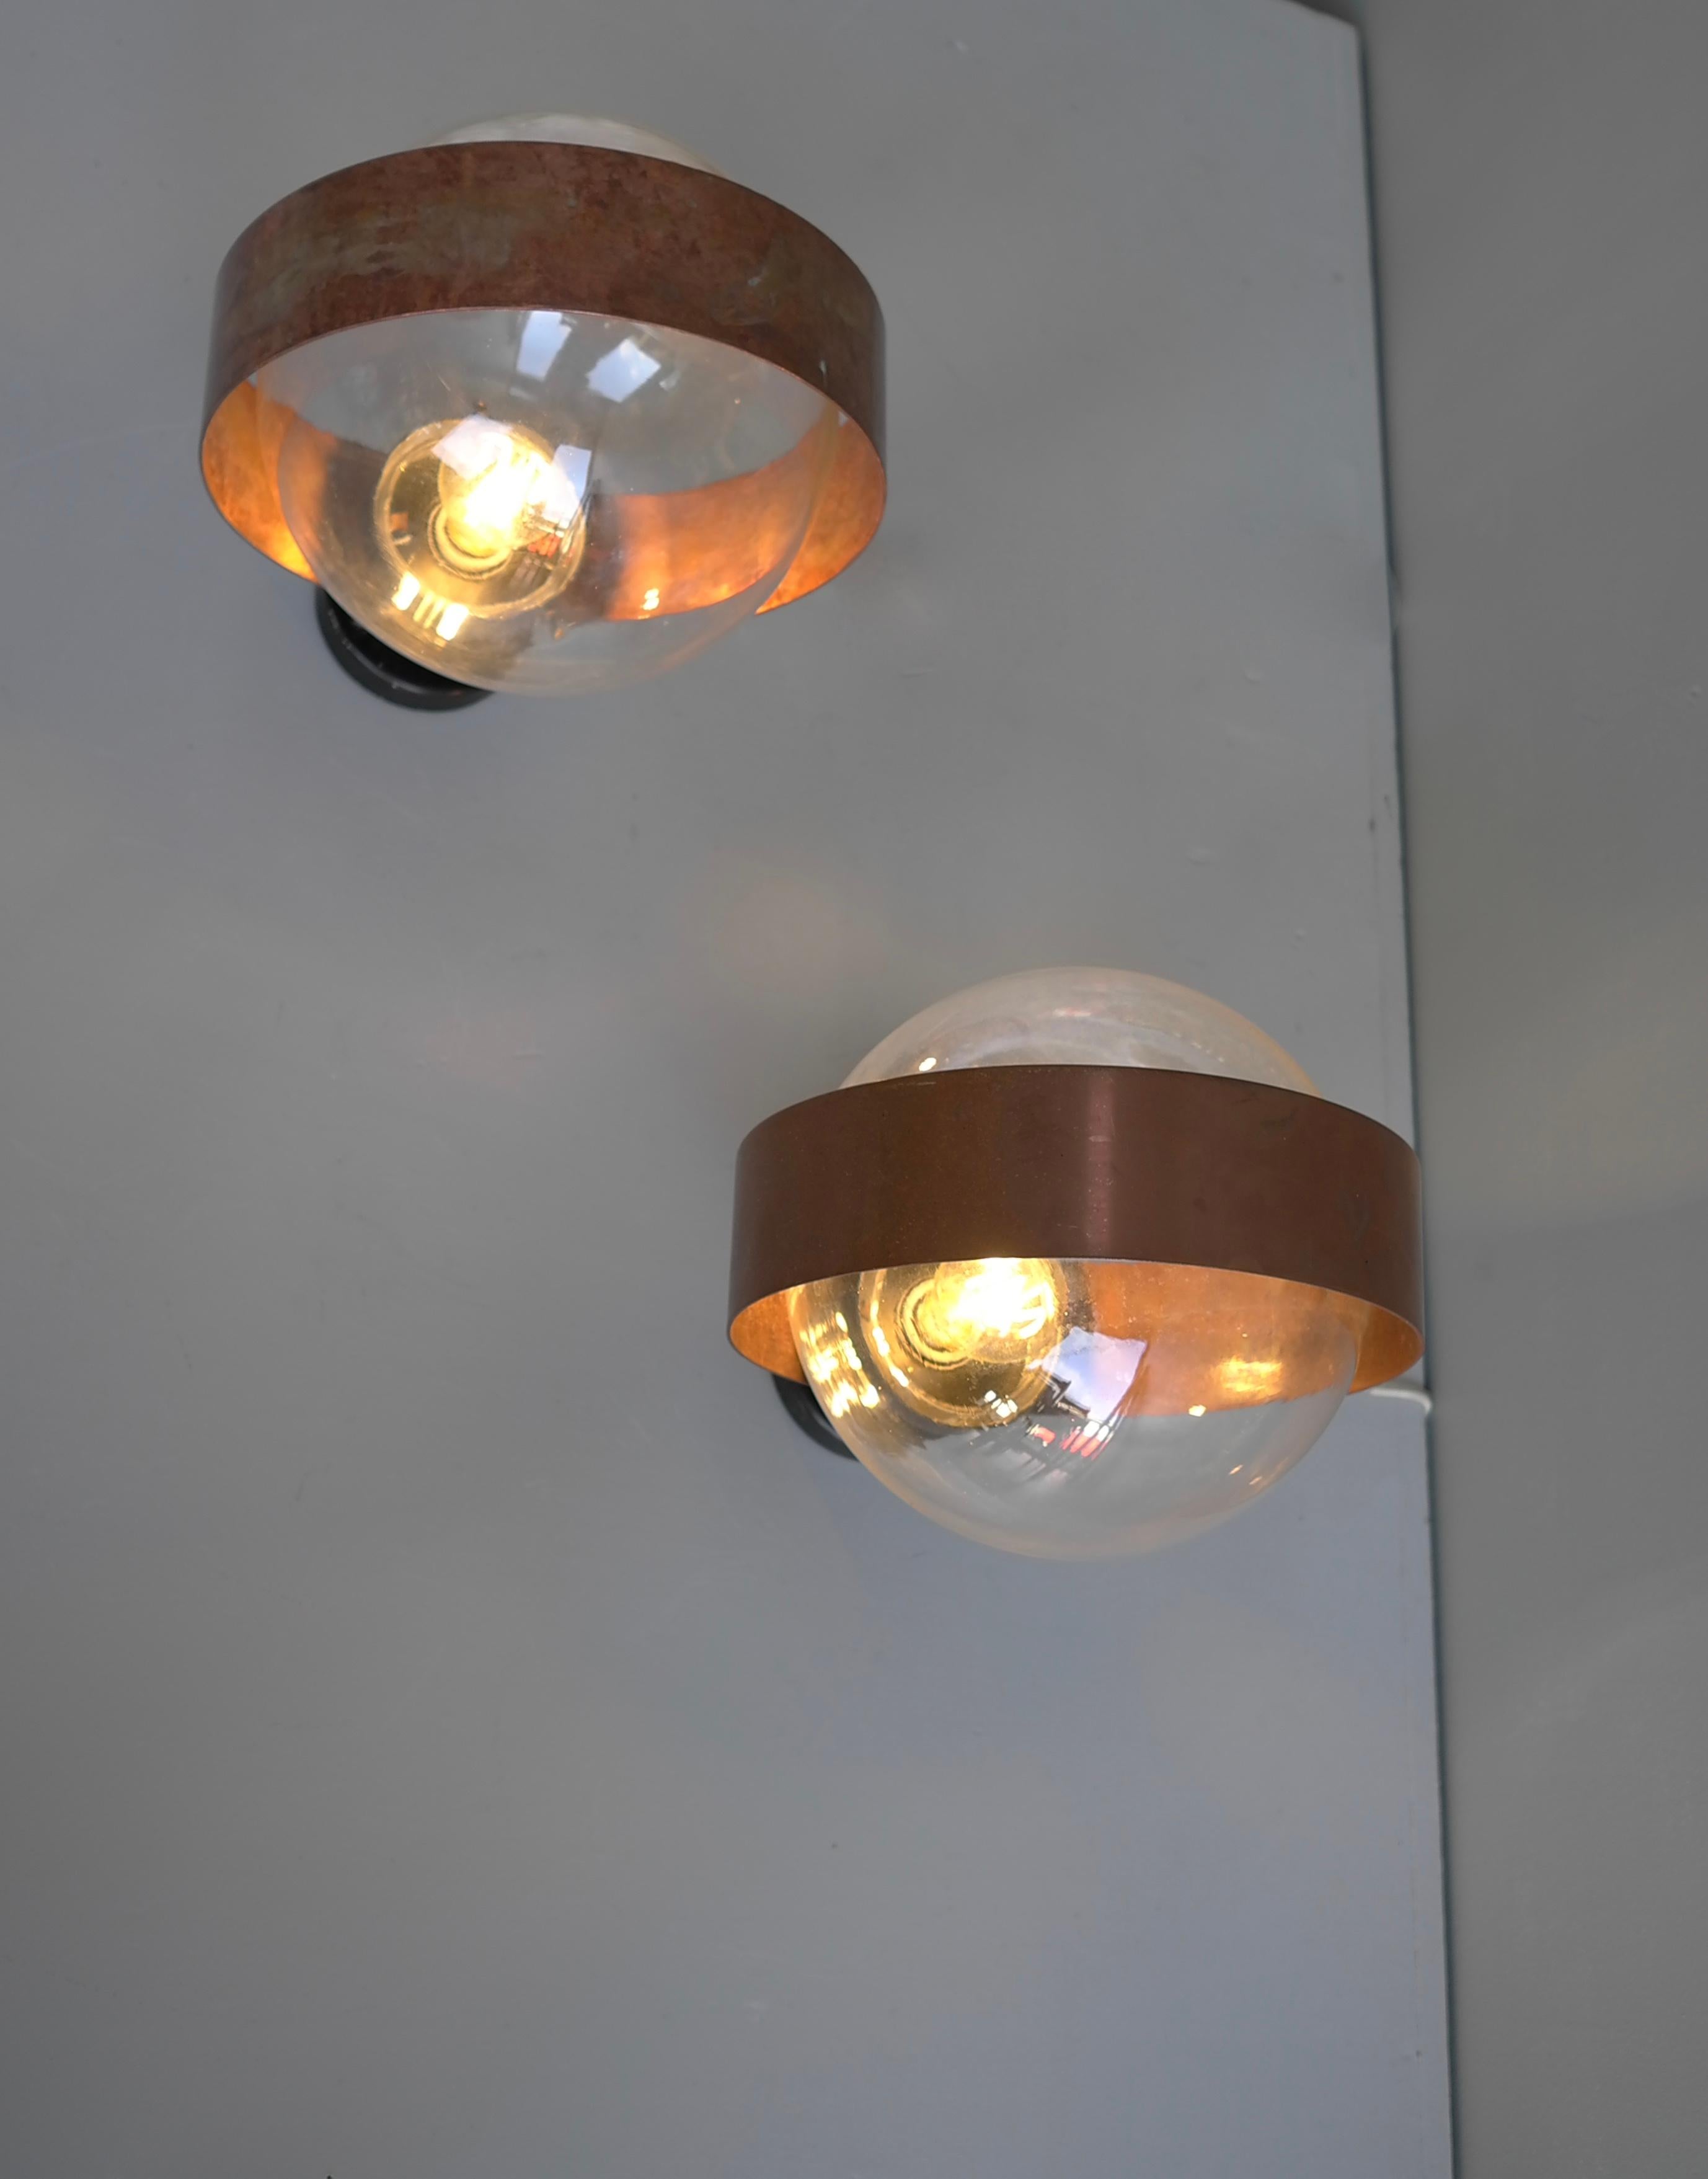 Pair of Scandinavian Glass Ball Wall lamps with Copper Patina Rims, 1960's In Good Condition For Sale In Den Haag, NL